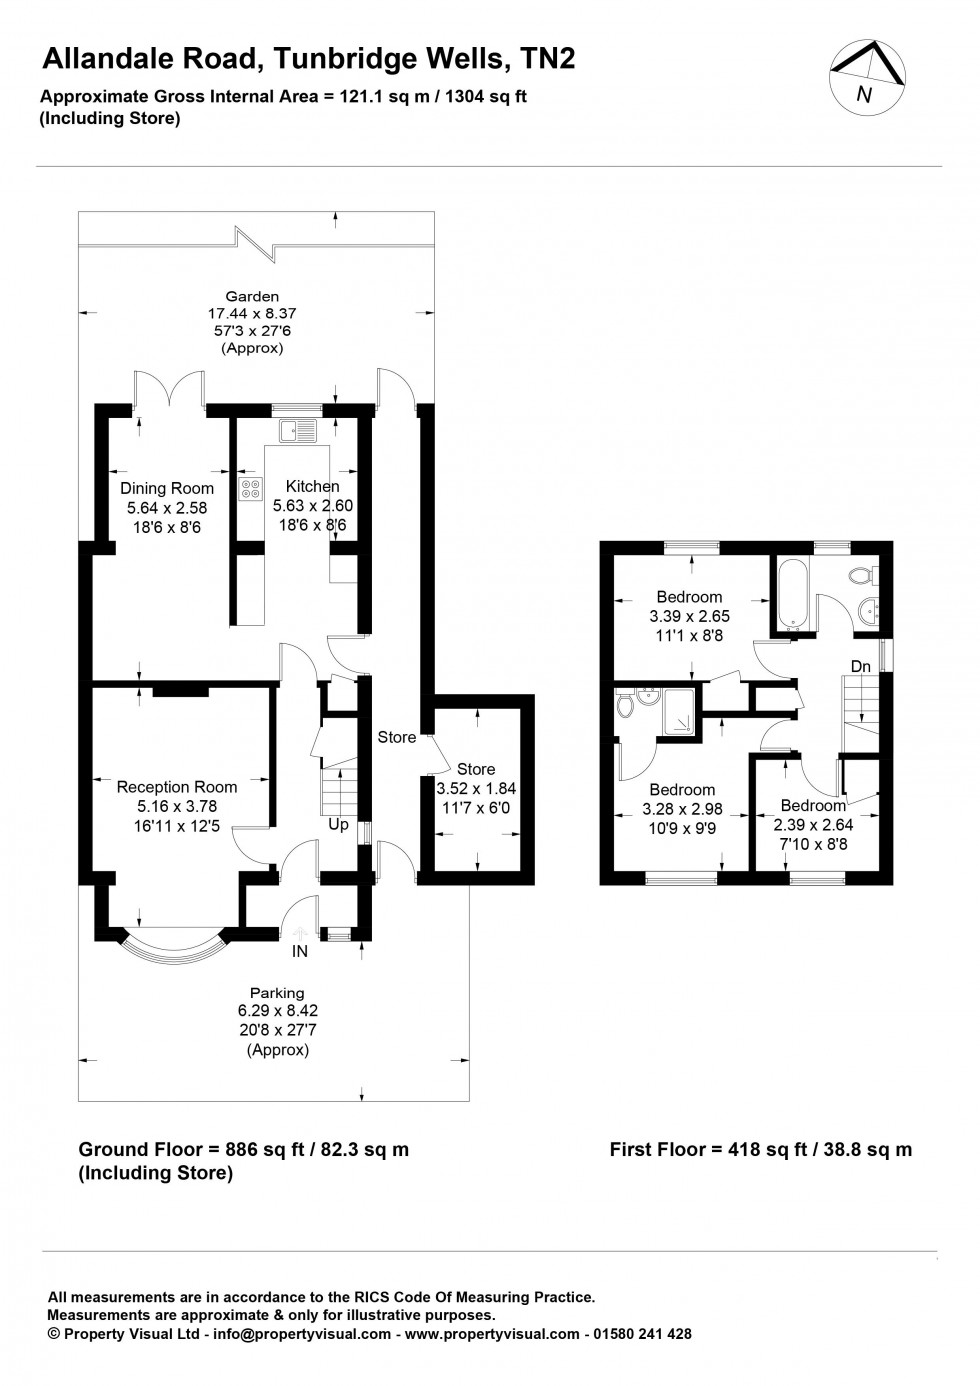 Floorplan for 3 Bed Semi-Detached House with 2 Bathrooms, Garden and Parking - Allandale Road TN2 3TZ - NO TENANT FEES!